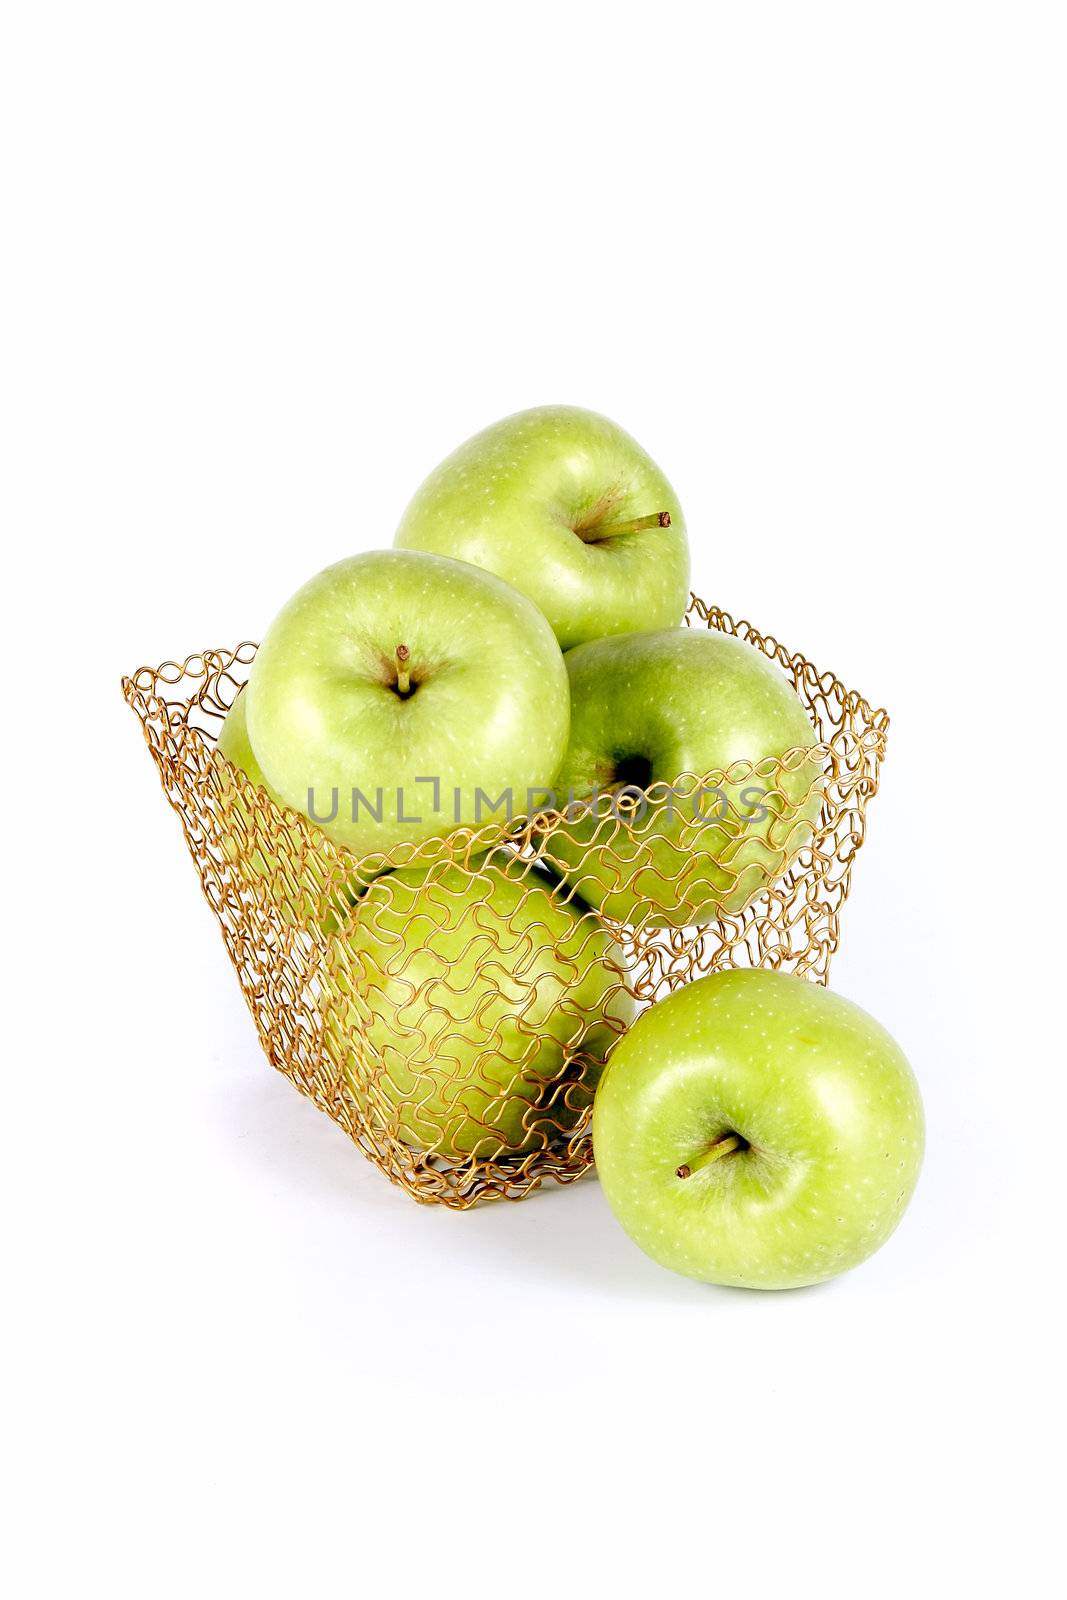 Green celebratory apples lie in a gold basket on a white background